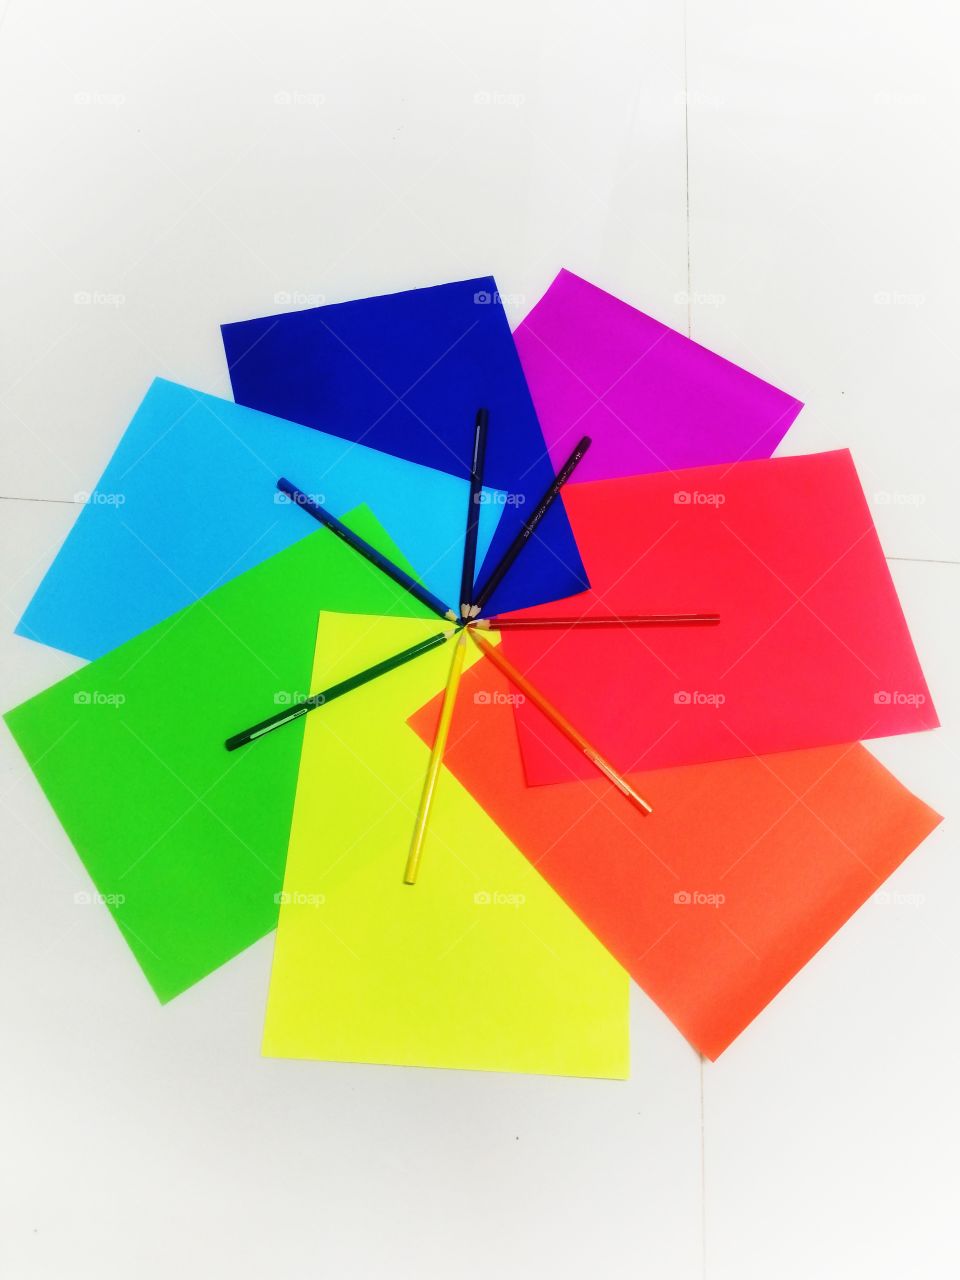 Colored papers and pencils in circular design.